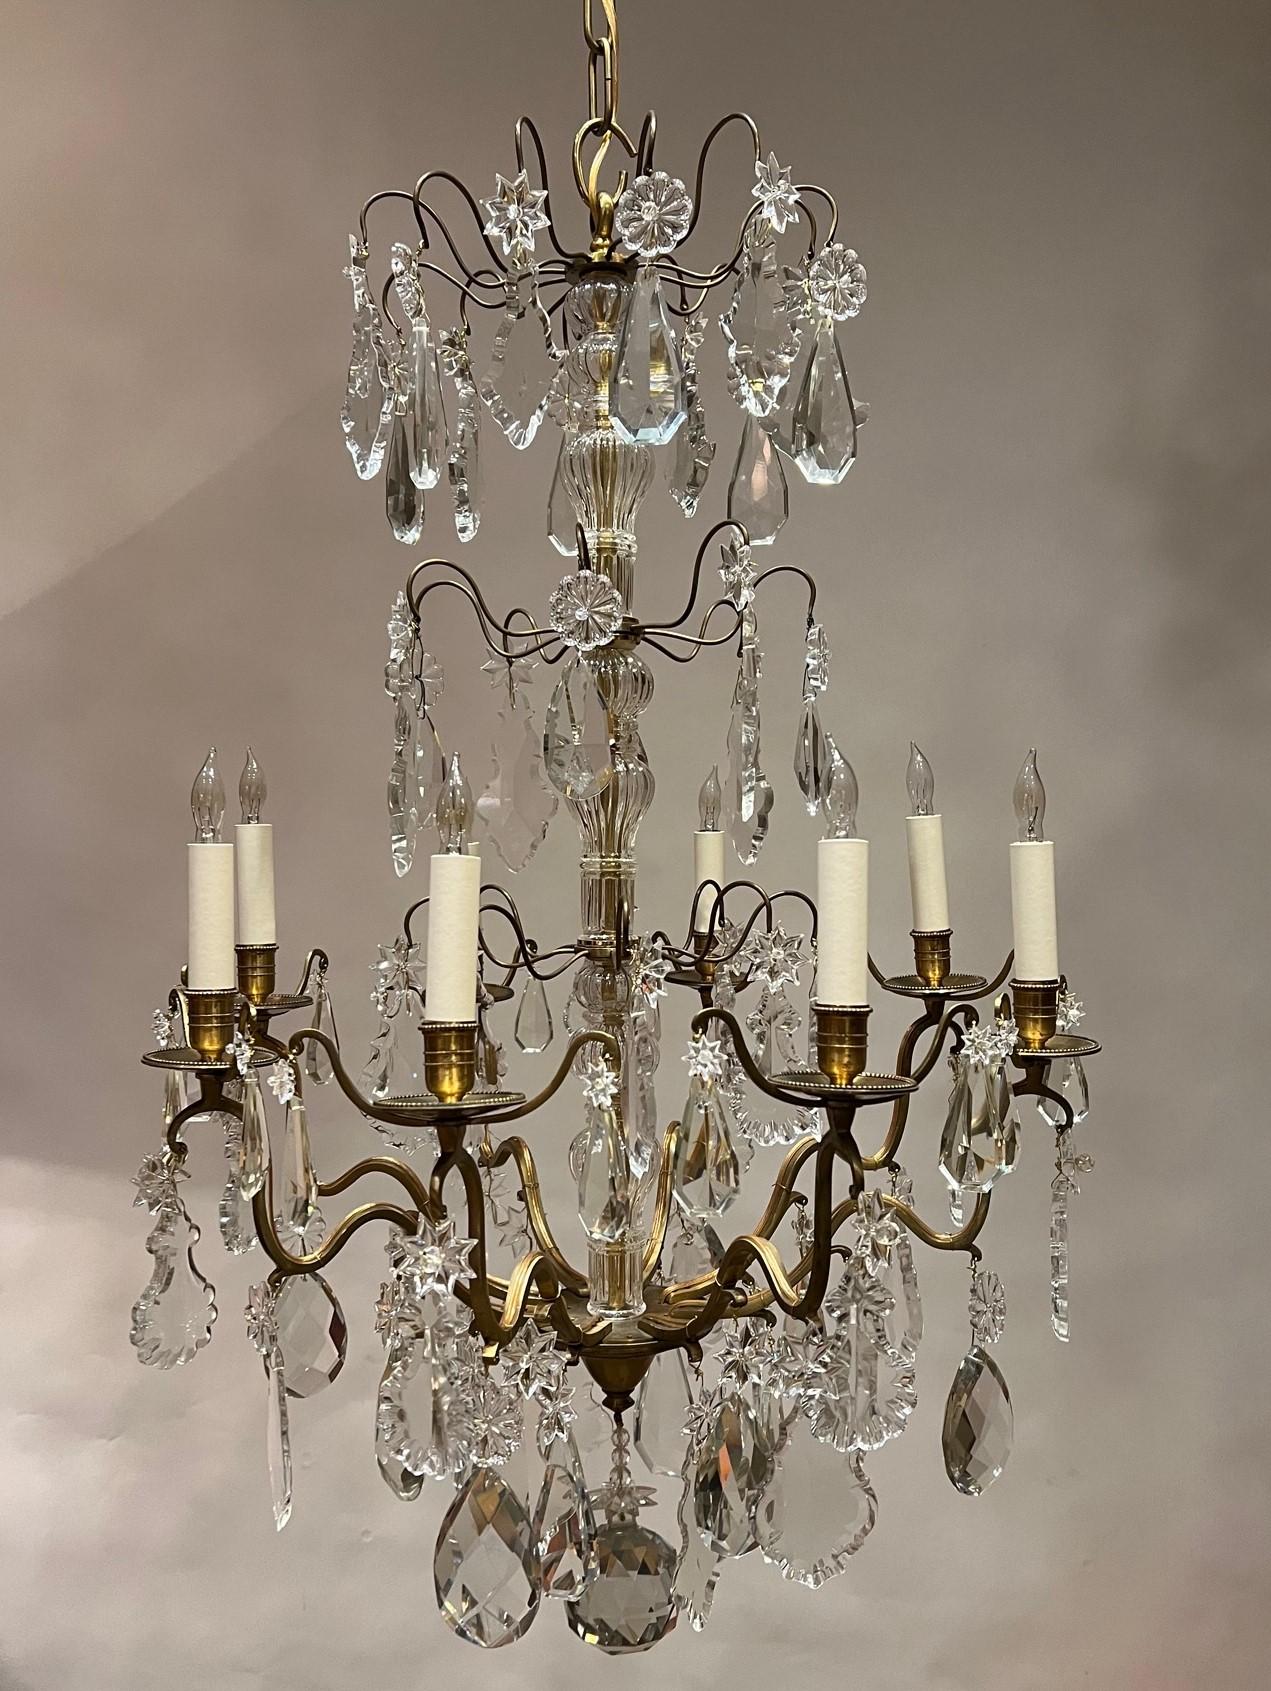 This handmade chandelier is an accurate copy of  a  mid-18th-Century fixture that would have hung in grand chateaus all over France. Today it is perfect for your living room, dining room or anywhere you need an elegant statement. The birdcage frame